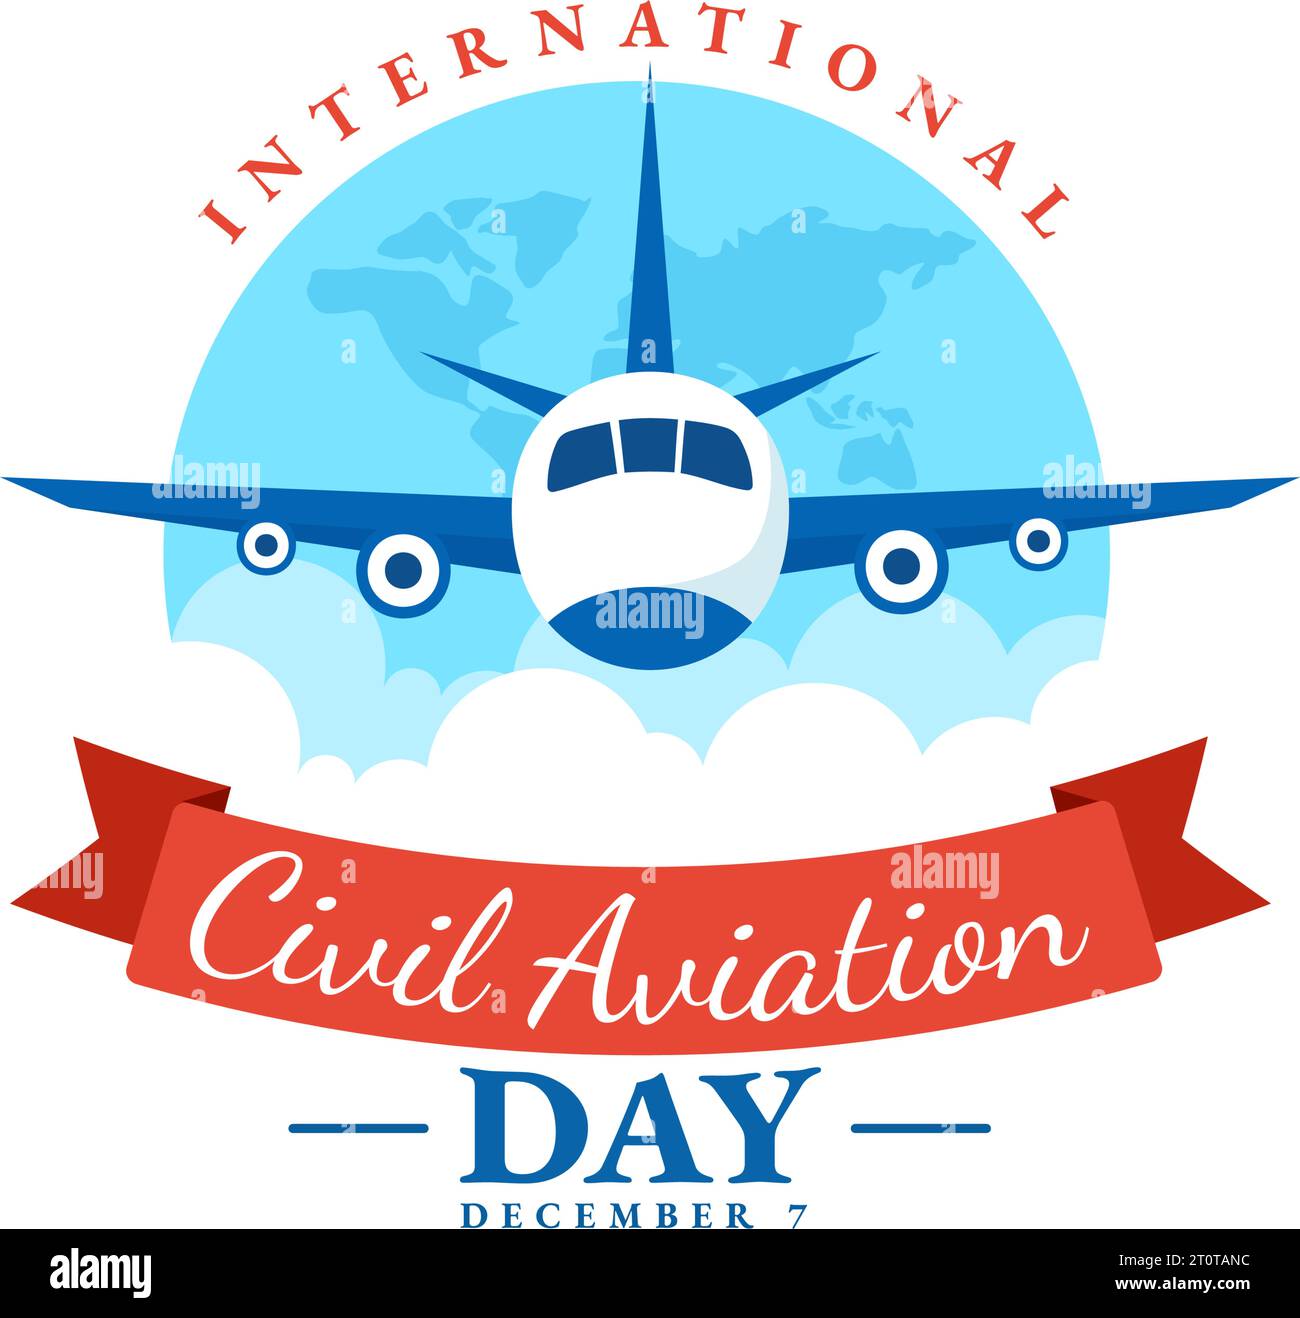 International Civil Aviation Day Vector Illustration on 7 December with Plane and Sky Blue View for Appreciate in Flat Cartoon Background Design Stock Vector